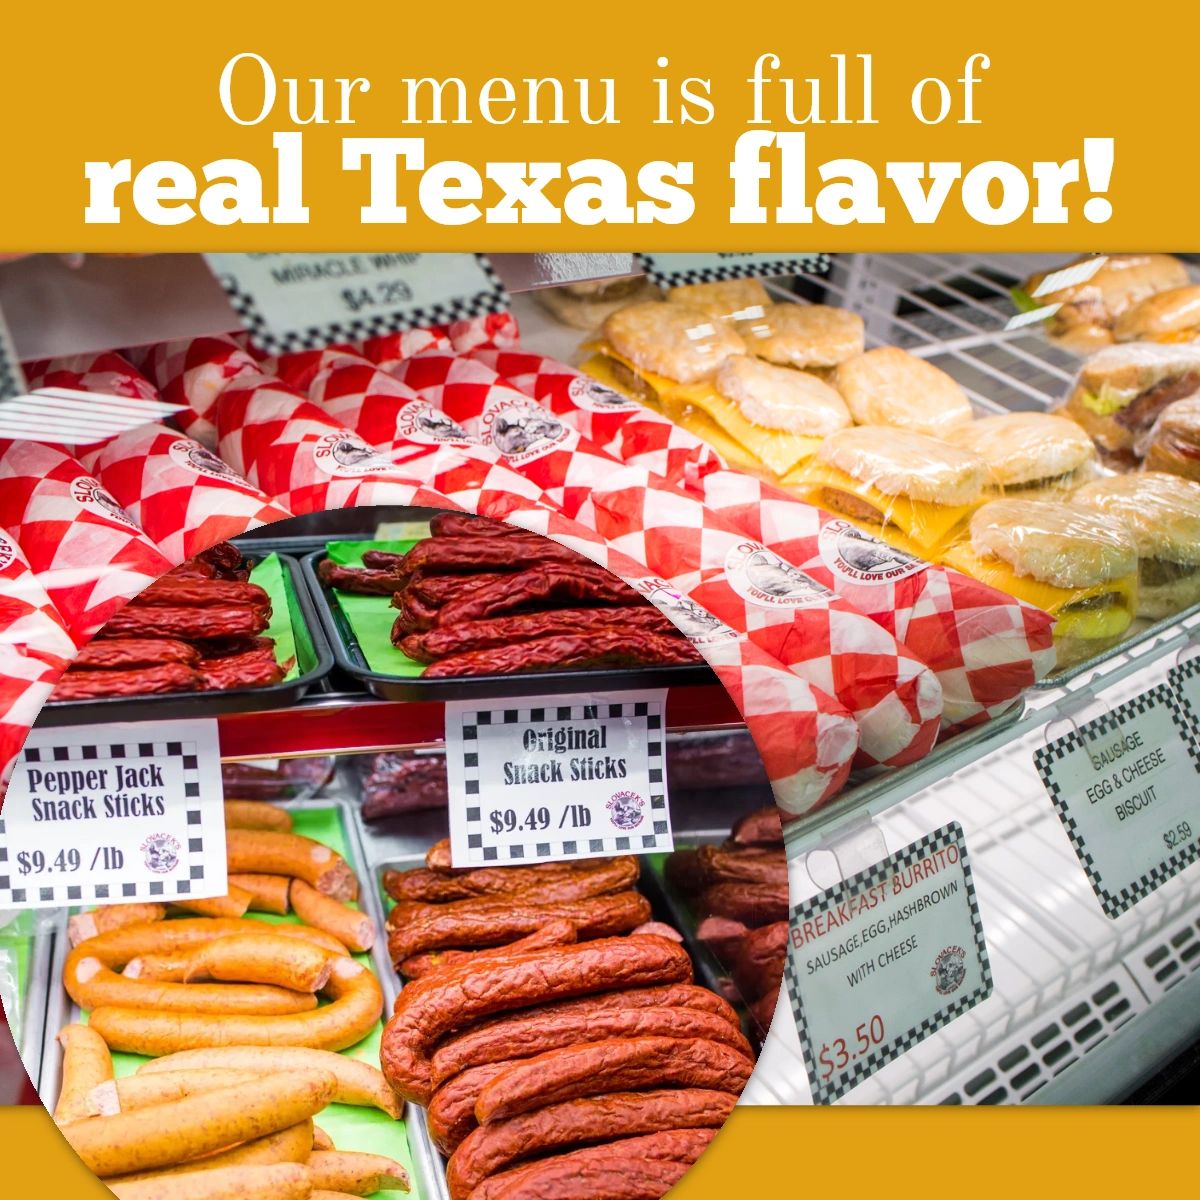 Feeling pressured to know what you want before you've explored all the wonderful options calling your name? Czech out our website before you visit for a preview of the items you'll find on our menus inside. #knowbeforyougo #slovacekswest #czechoutslovaceks slovacekwesttexas.com/menu/meat-mark…